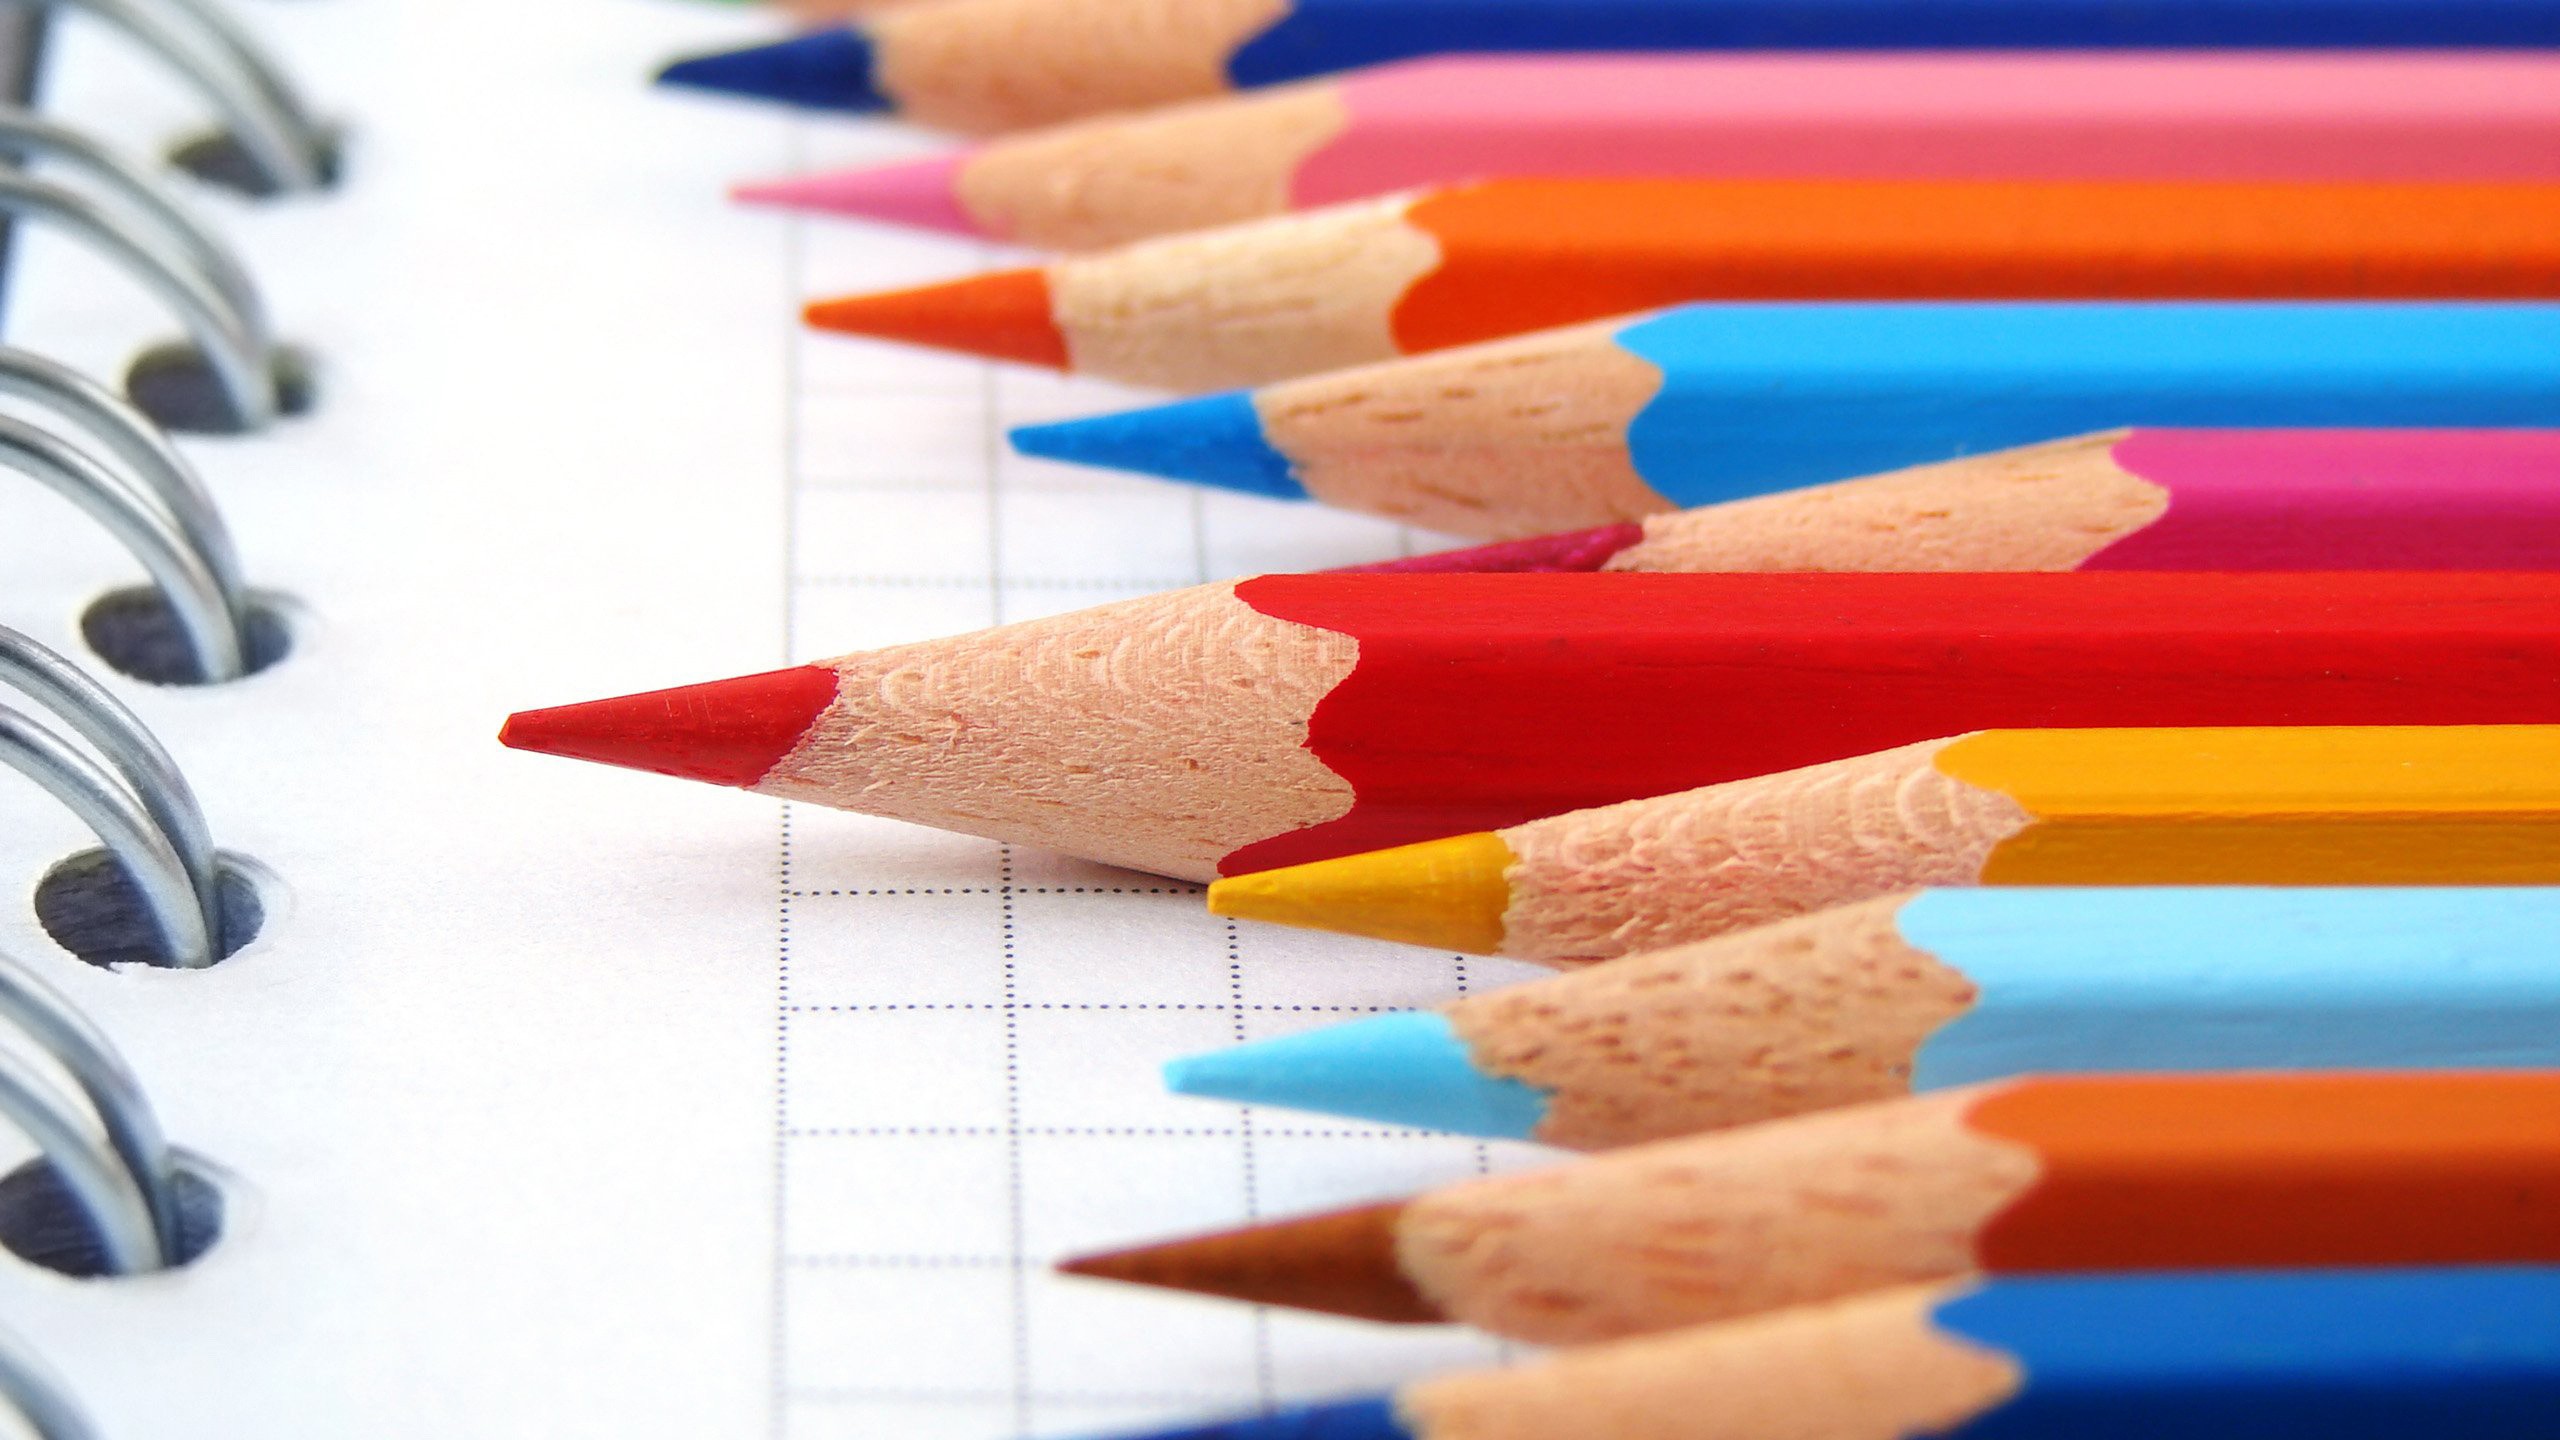 General 2560x1440 macro pencils colorful red yellow blue paper